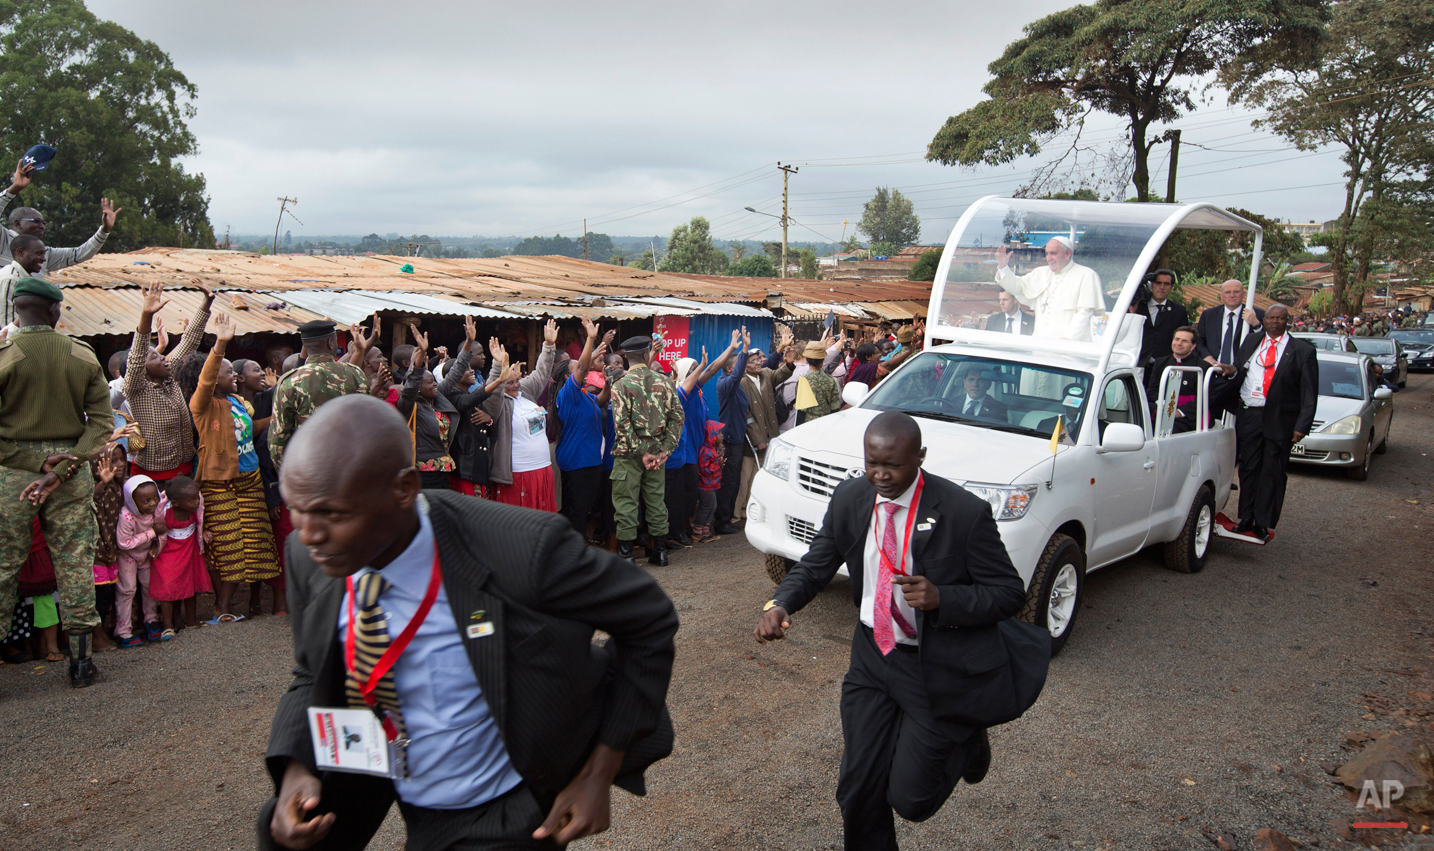  Pope Francis waves to local residents as he drives to St. Joseph The Worker Catholic Church in the Kangemi slum of Nairobi, Kenya Friday, Nov. 27, 2015. Pope Francis is in Kenya on his first-ever trip to Africa, a six-day pilgrimage that will also t